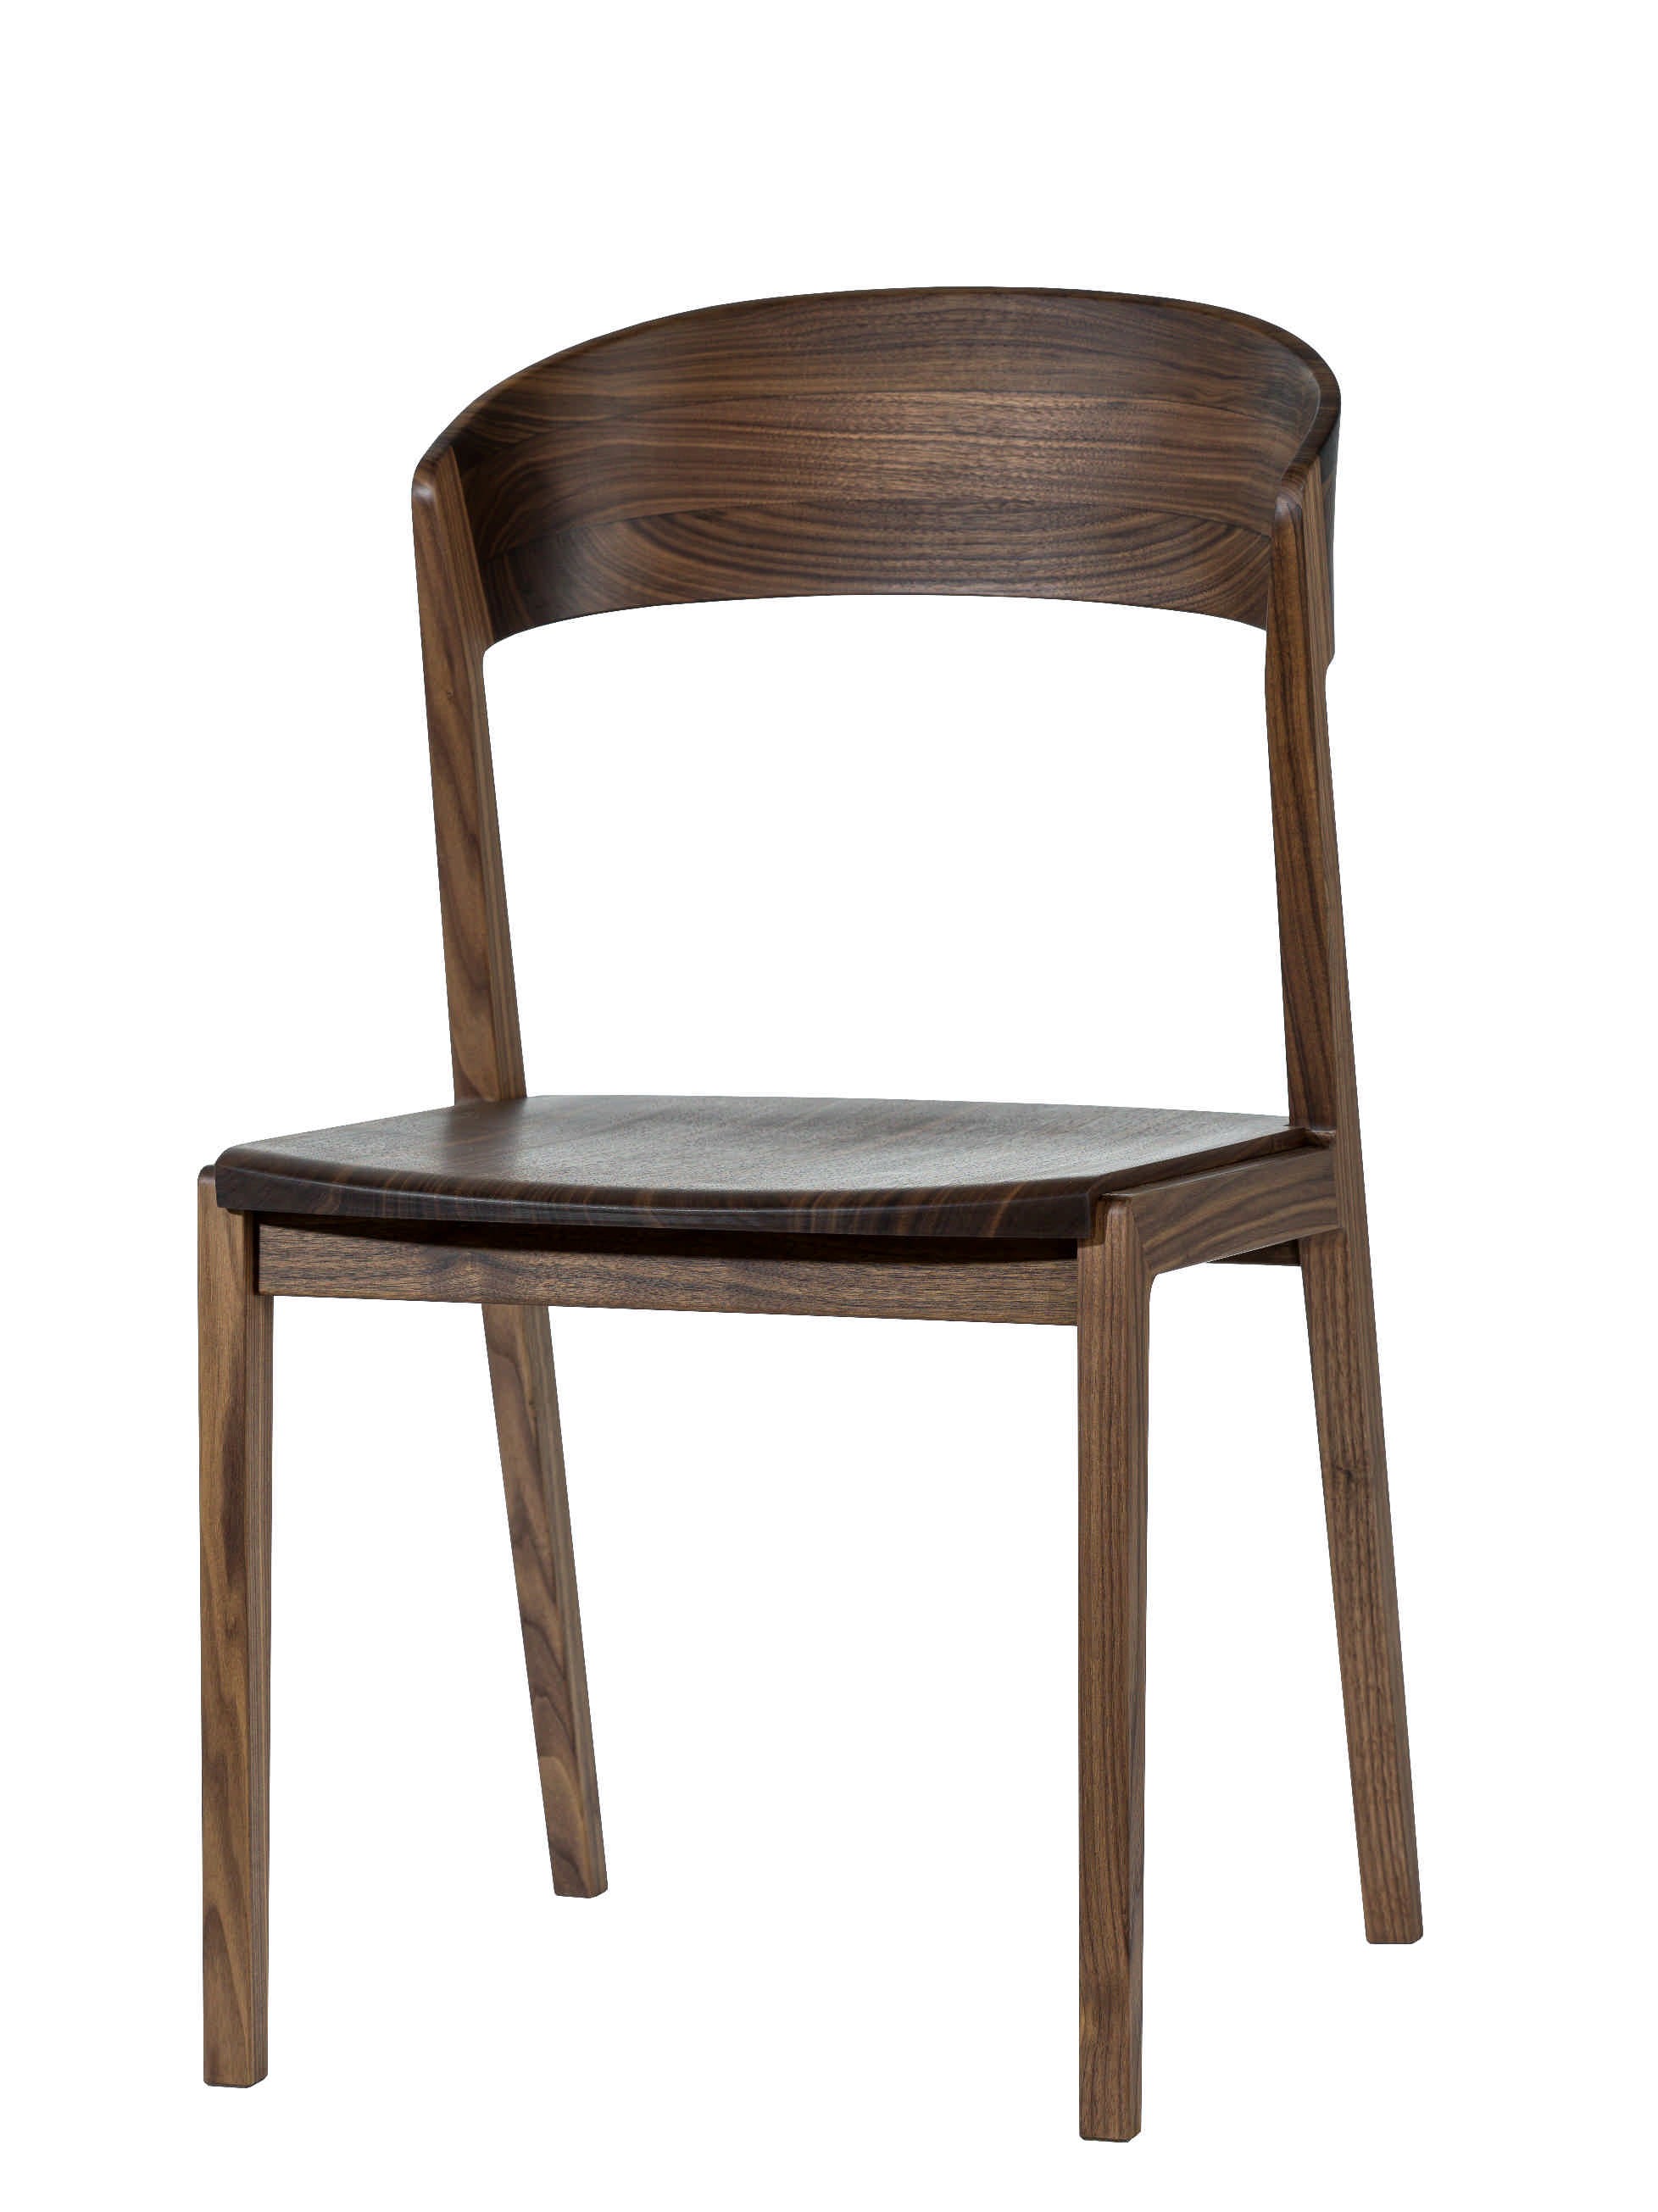 ANCORA CHAIR WHOLLY WOODEN